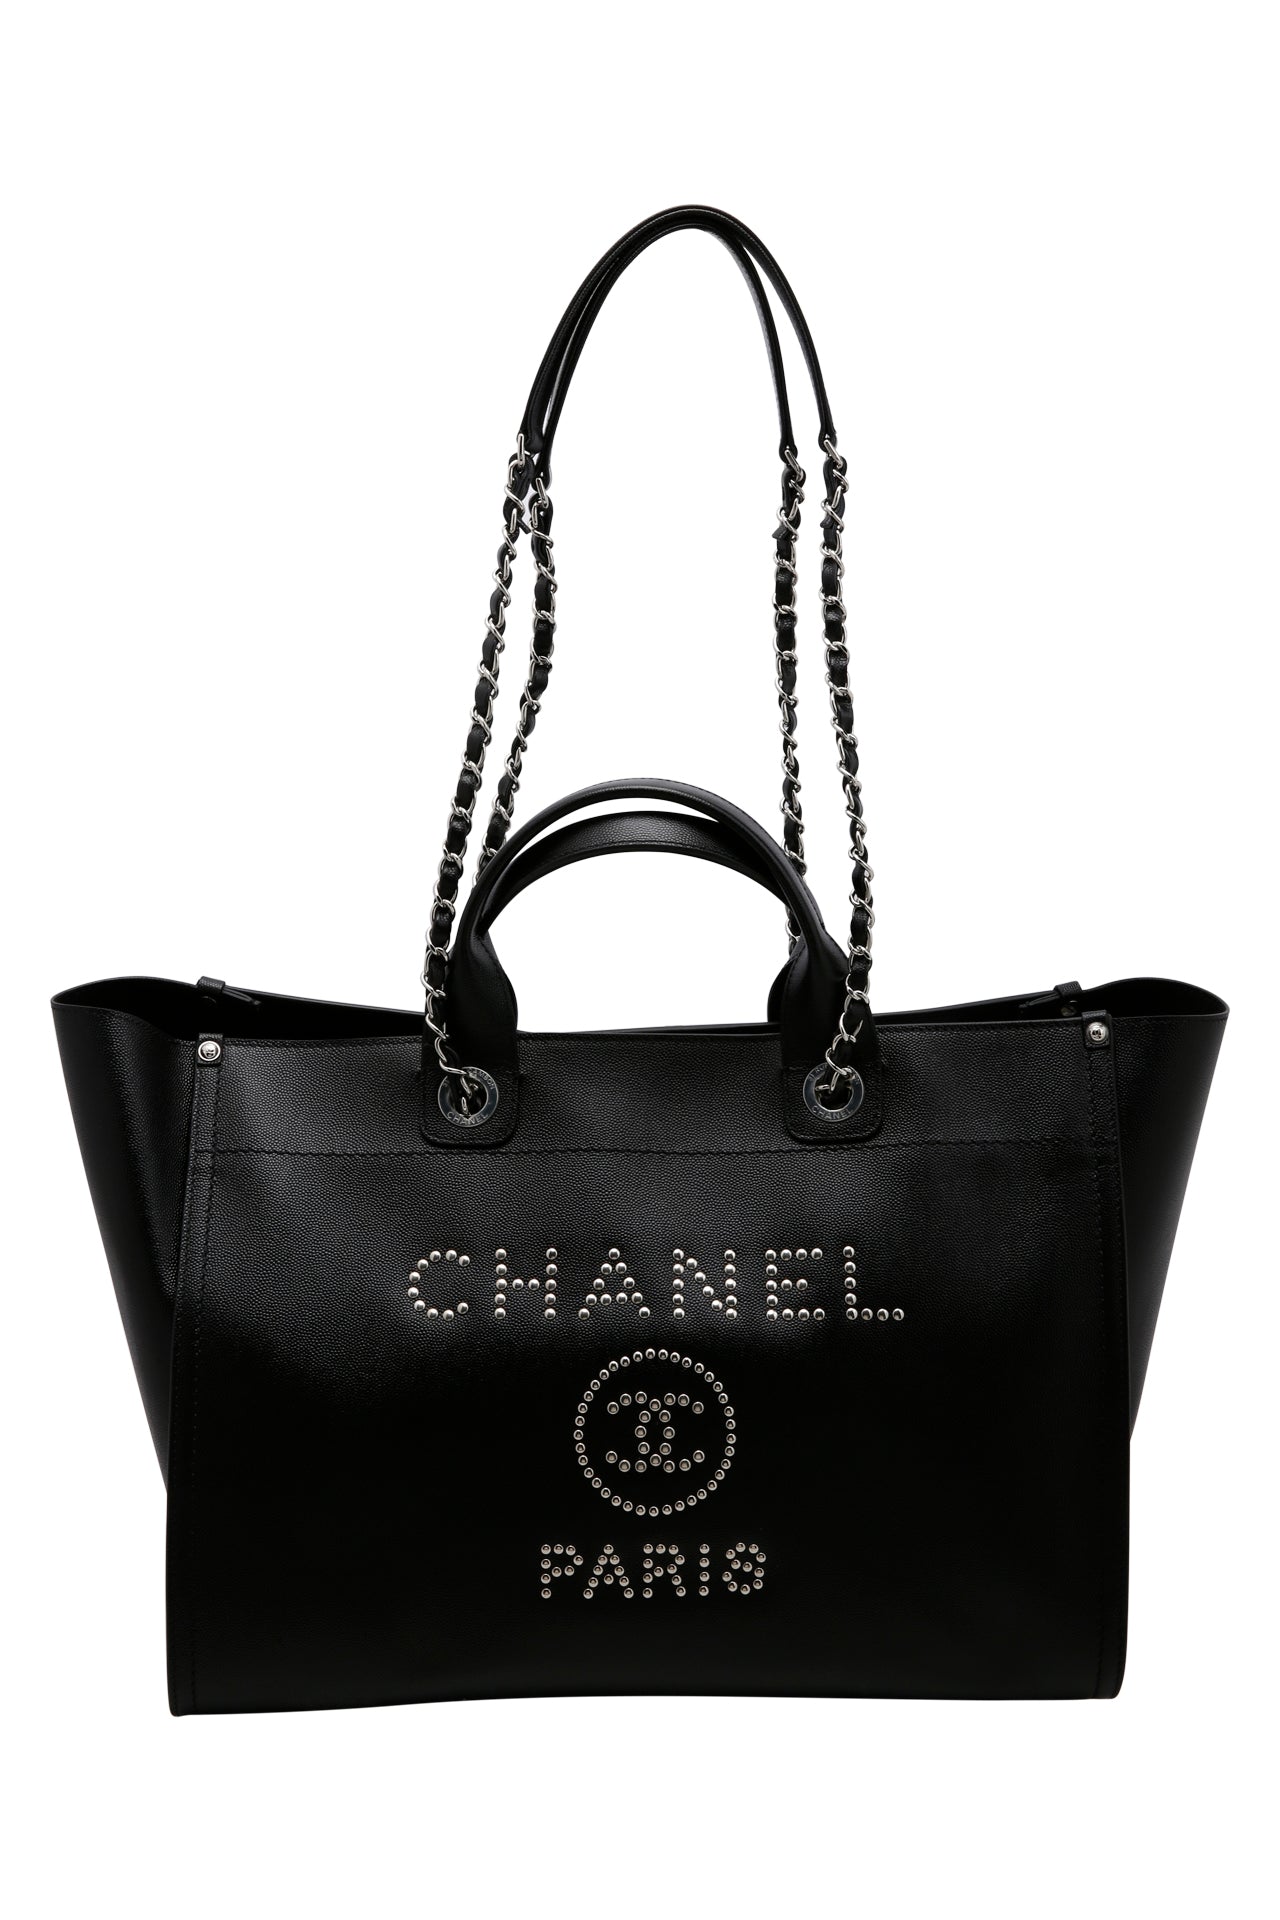 Chanel // Black Caviar Studded Deauville Tote – VSP Consignment